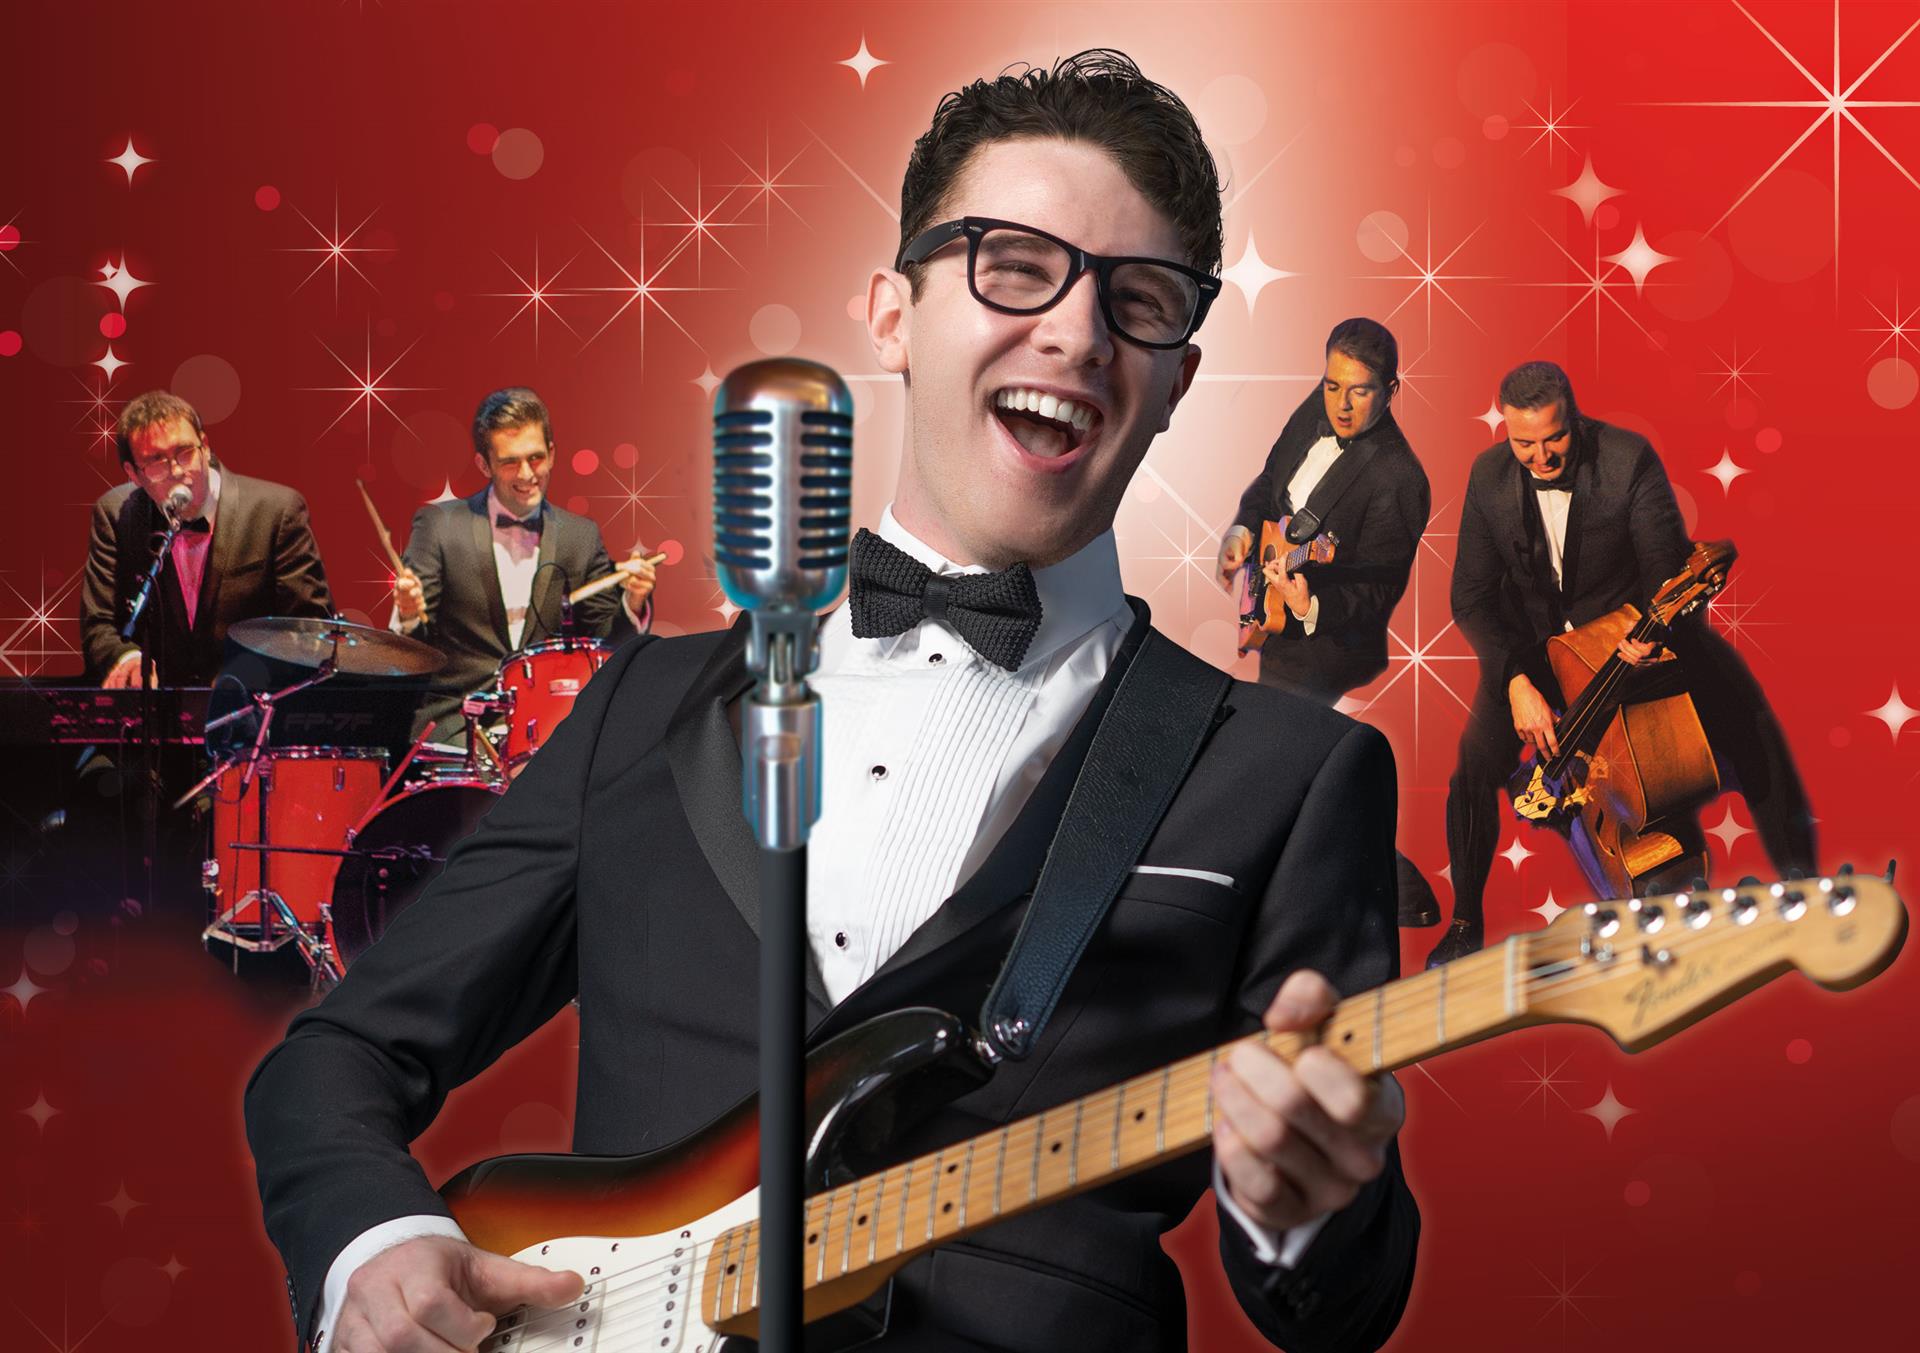 Buddy Holly & The Cricketers – Holly At Christmas 2022 - Lowther Pavilion